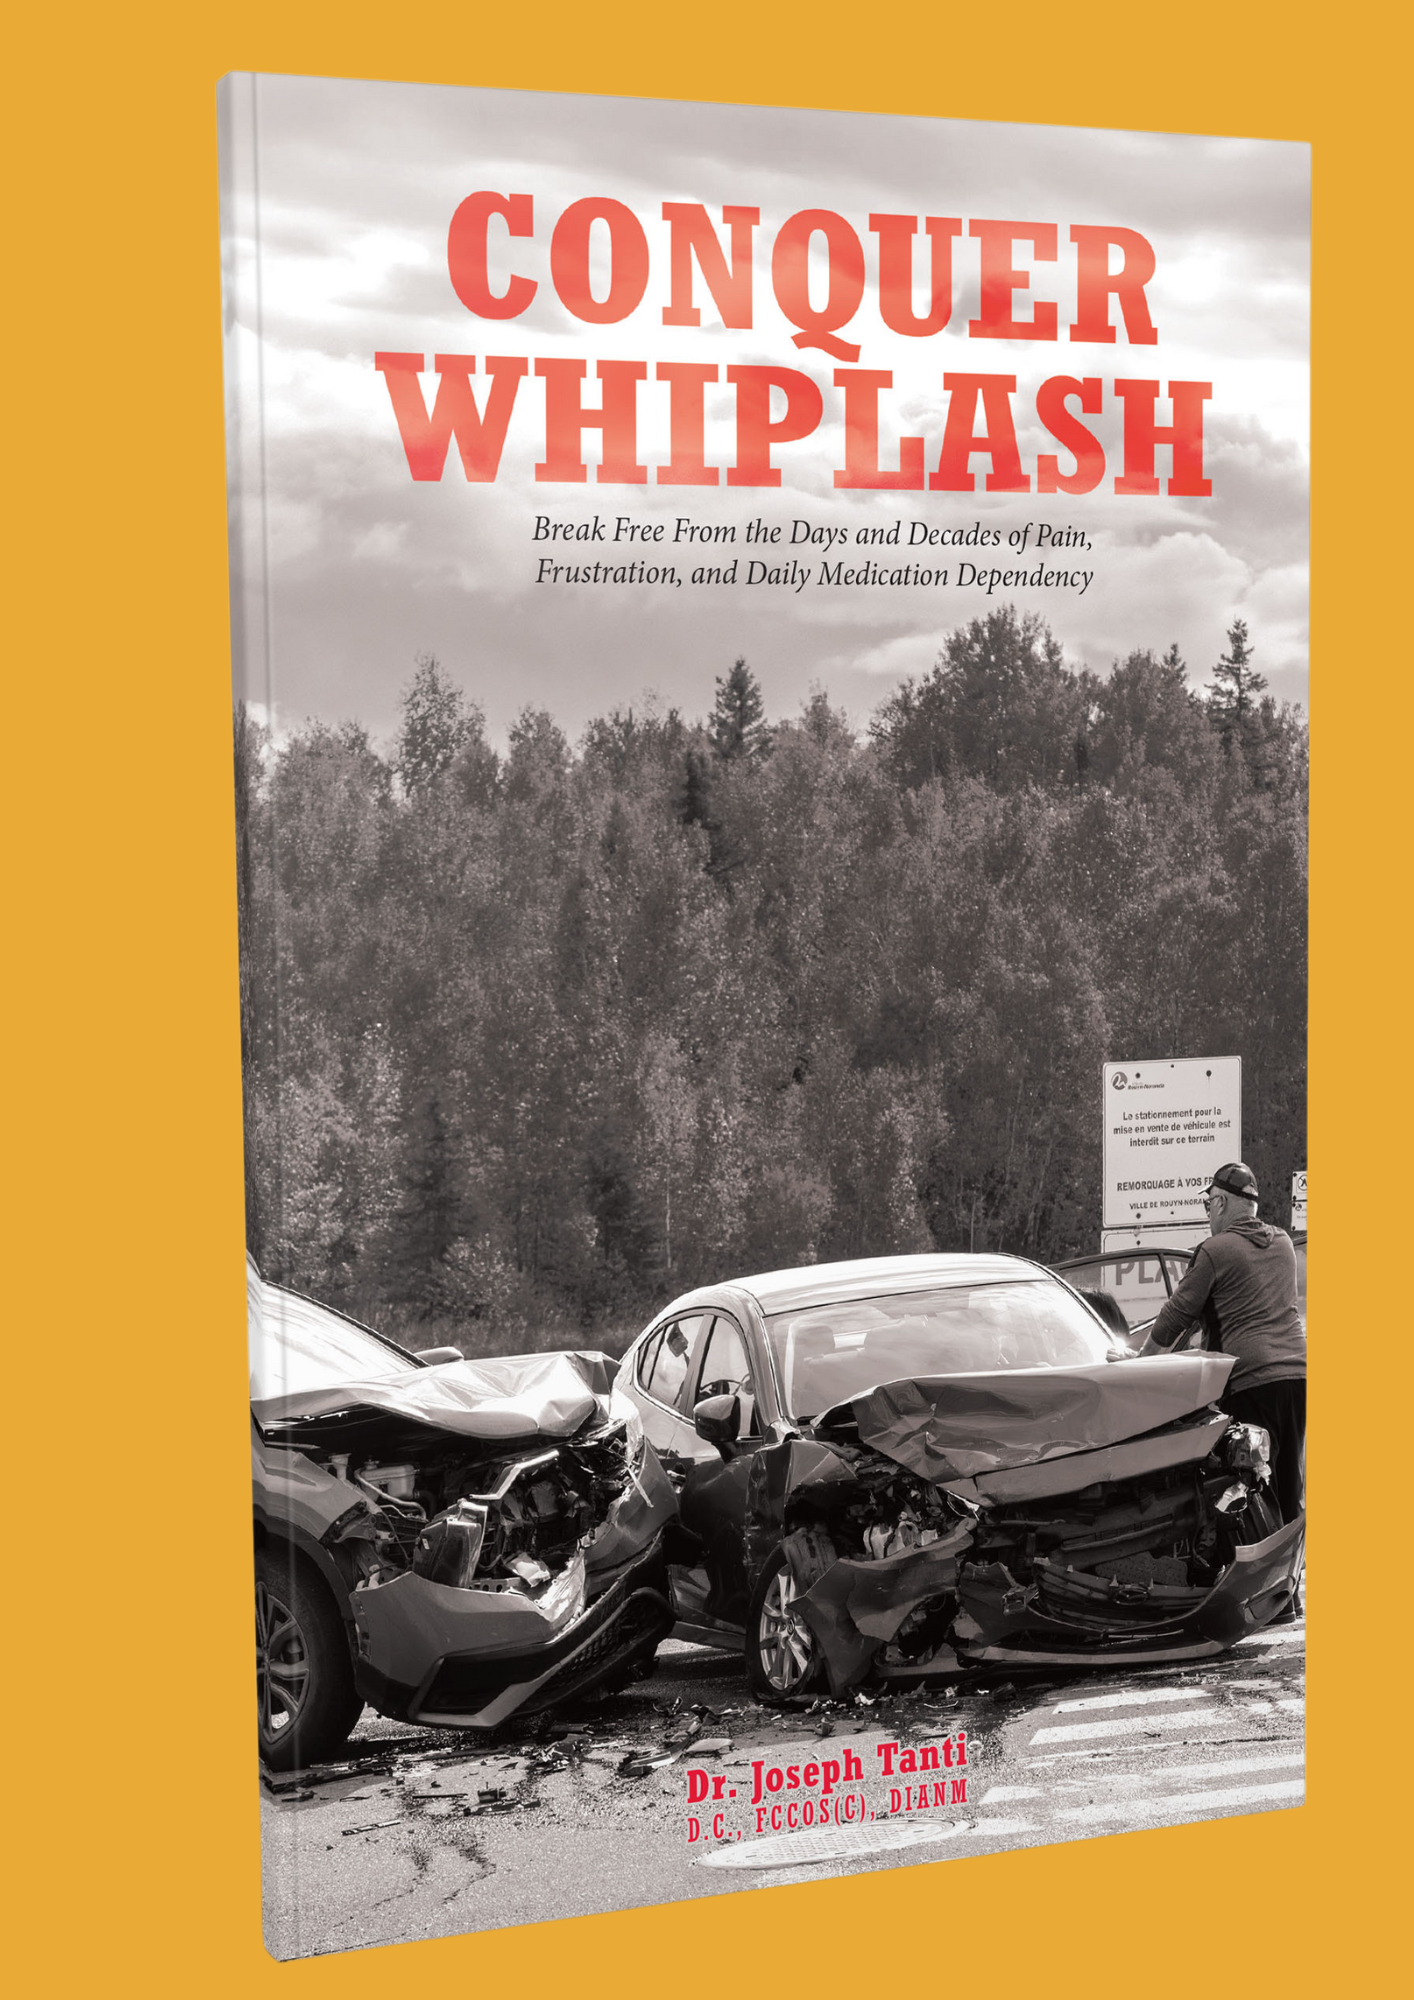 Book Cover for the book titled "Conquer Whiplash" by Dr. Joseph Tanti, a chiropractic orthopaedic specialist